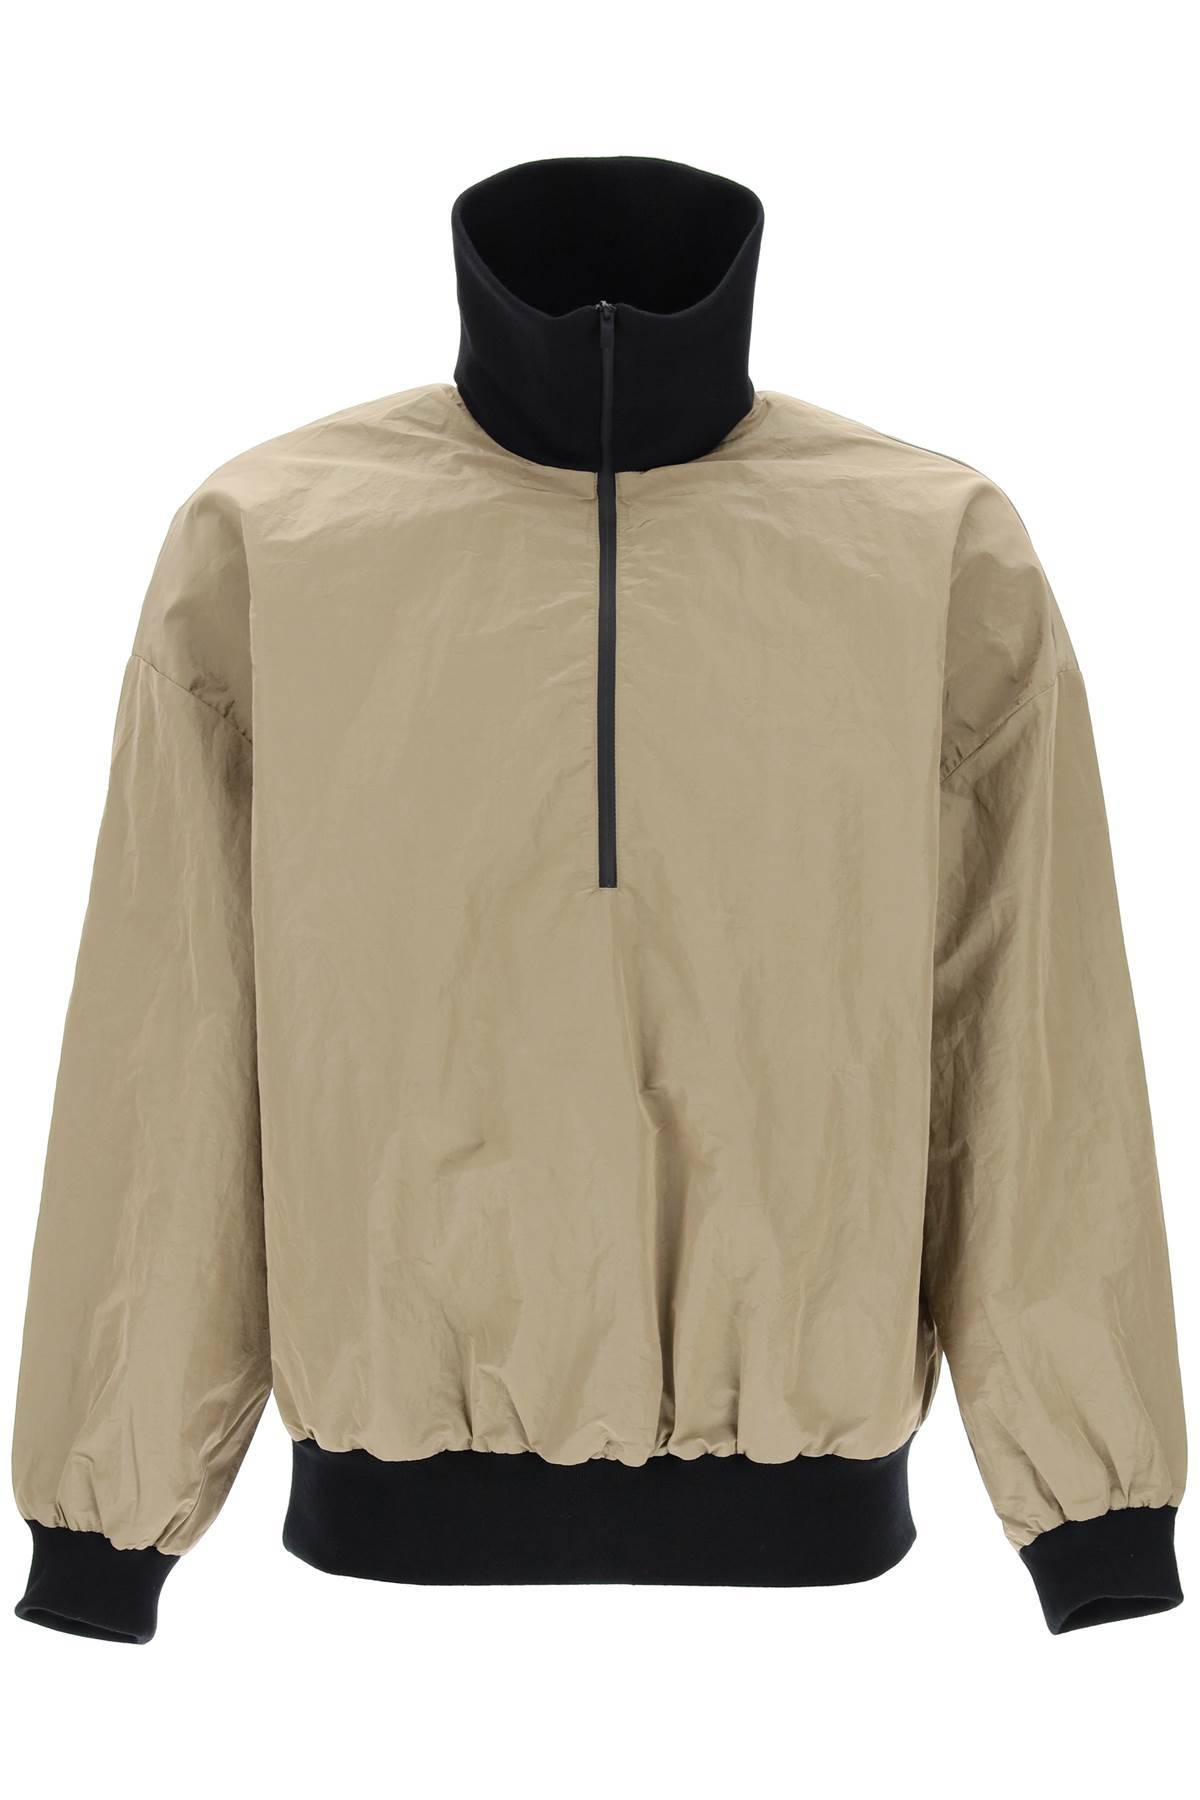 Fear Of God FEAR OF GOD "half-zip track jacket with